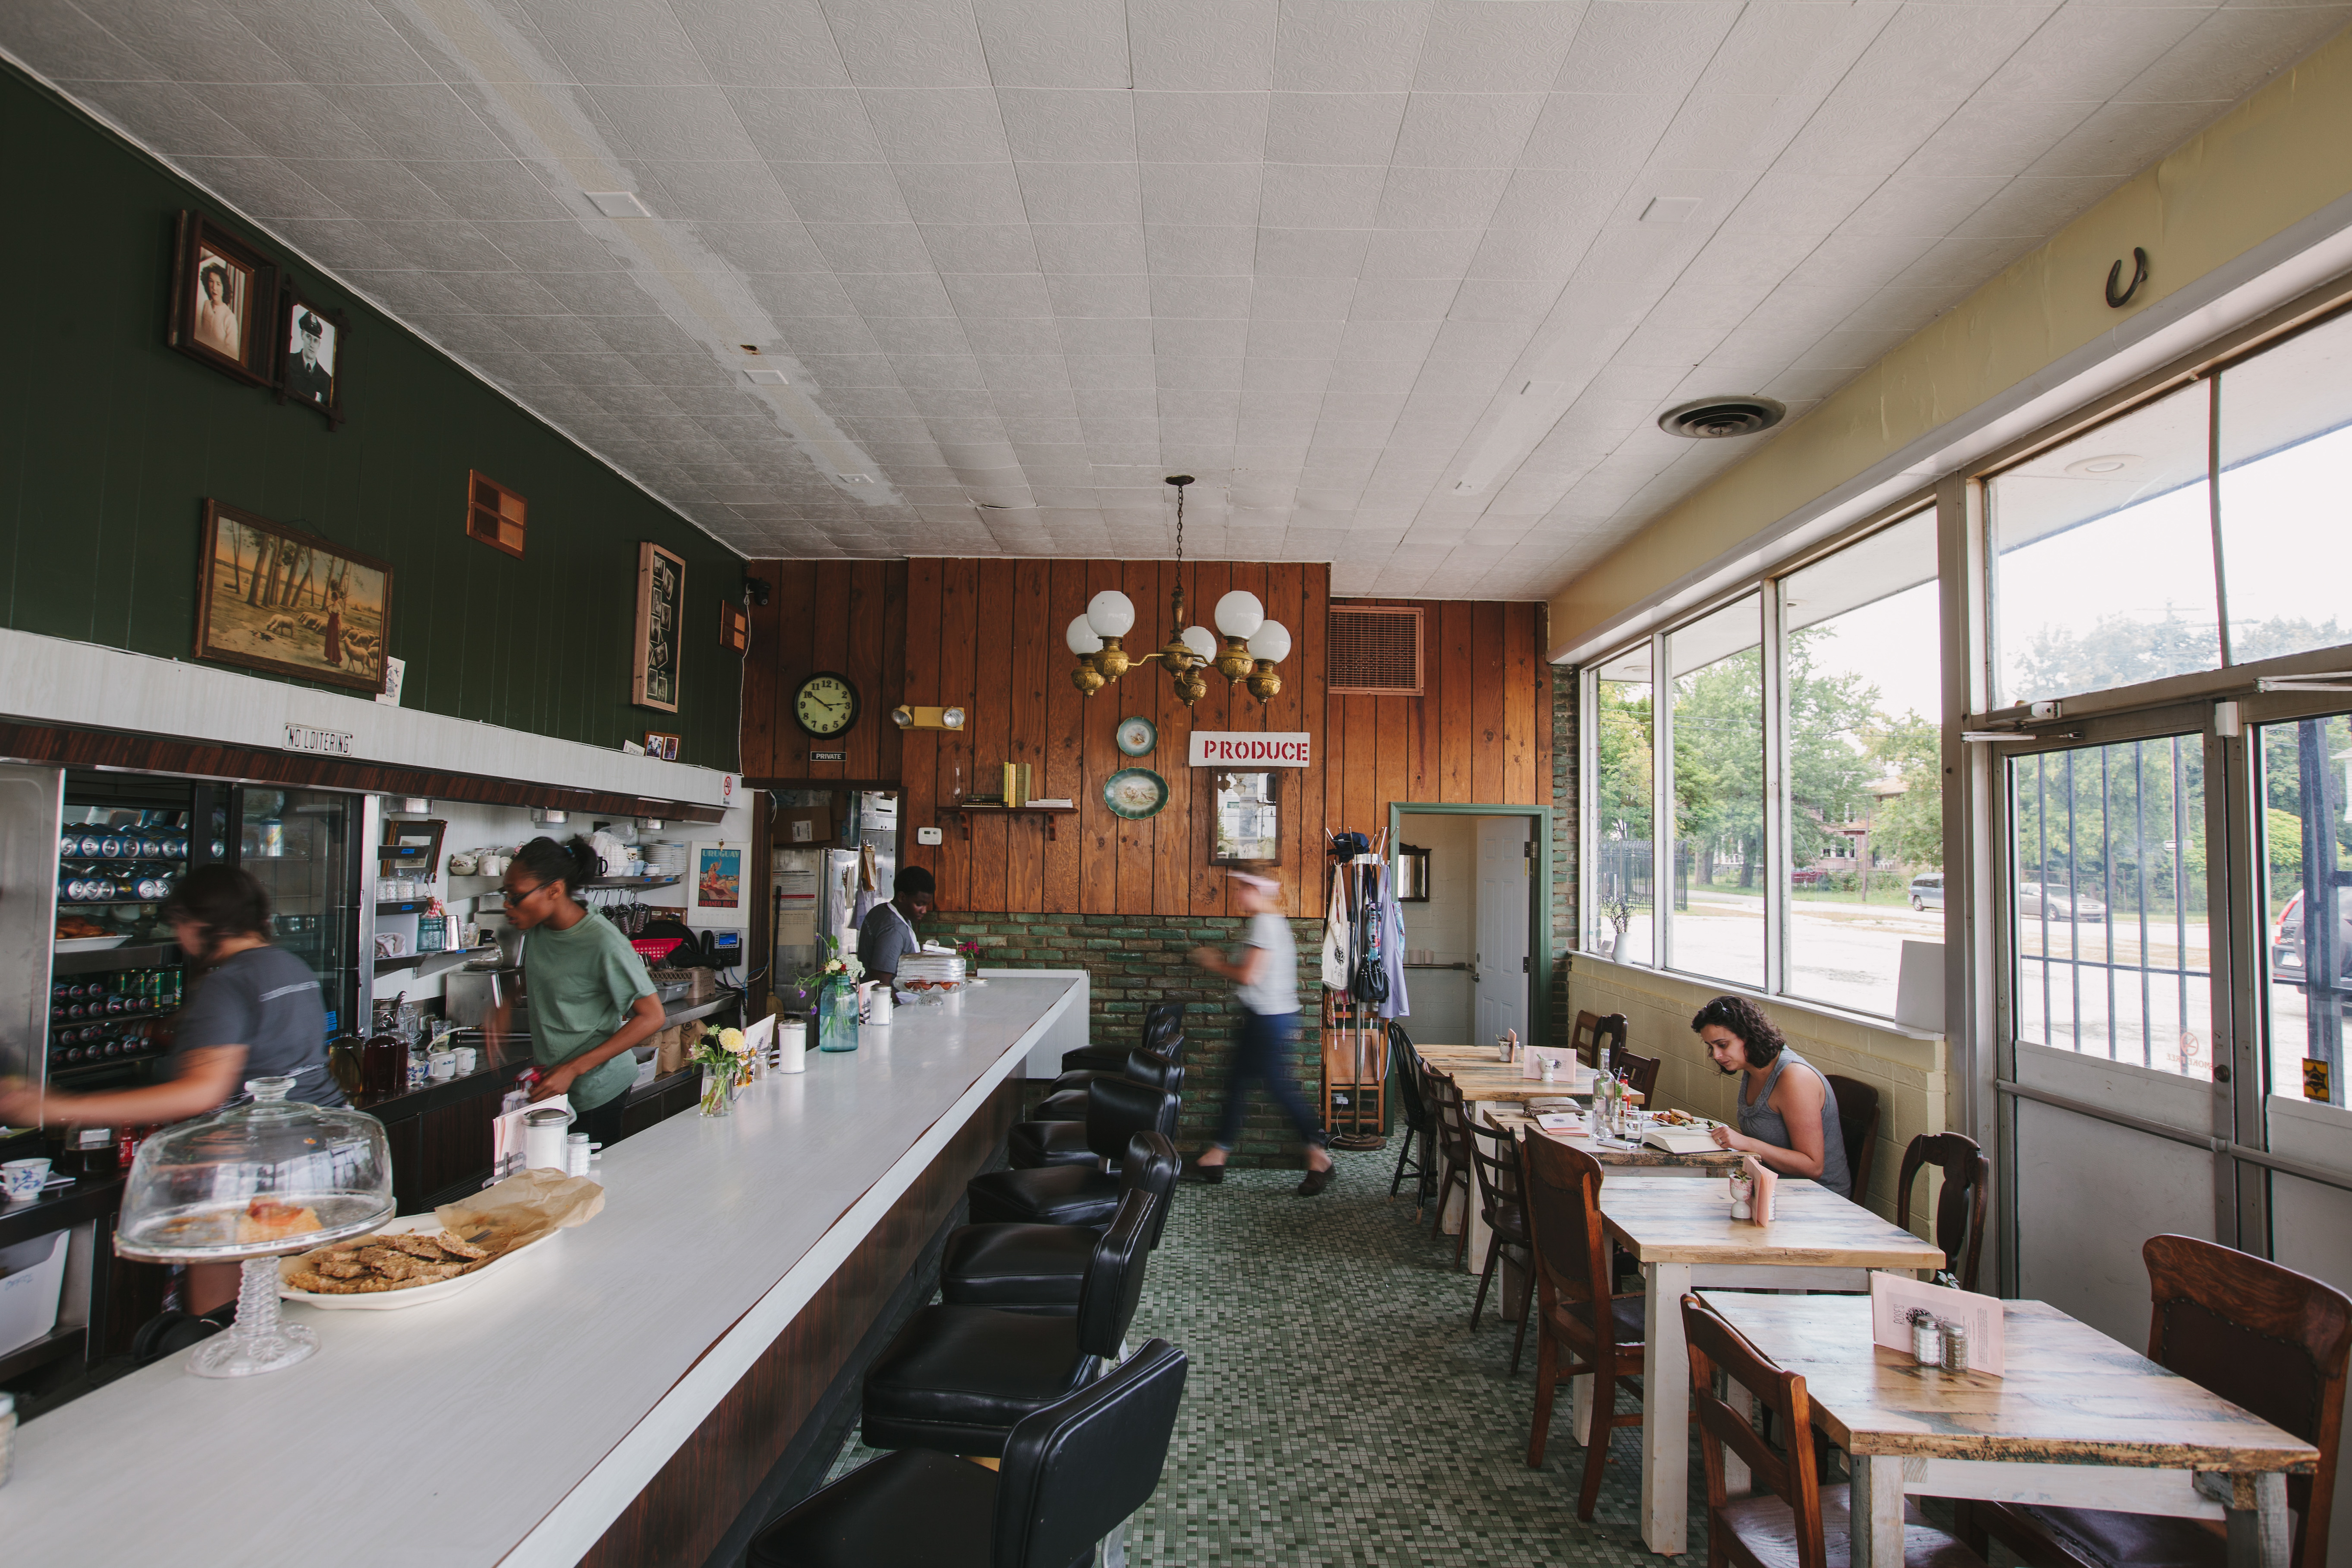 A green and wood-paneled diner restaurant with a lunch counter and kitchen staff standing behind the bar.